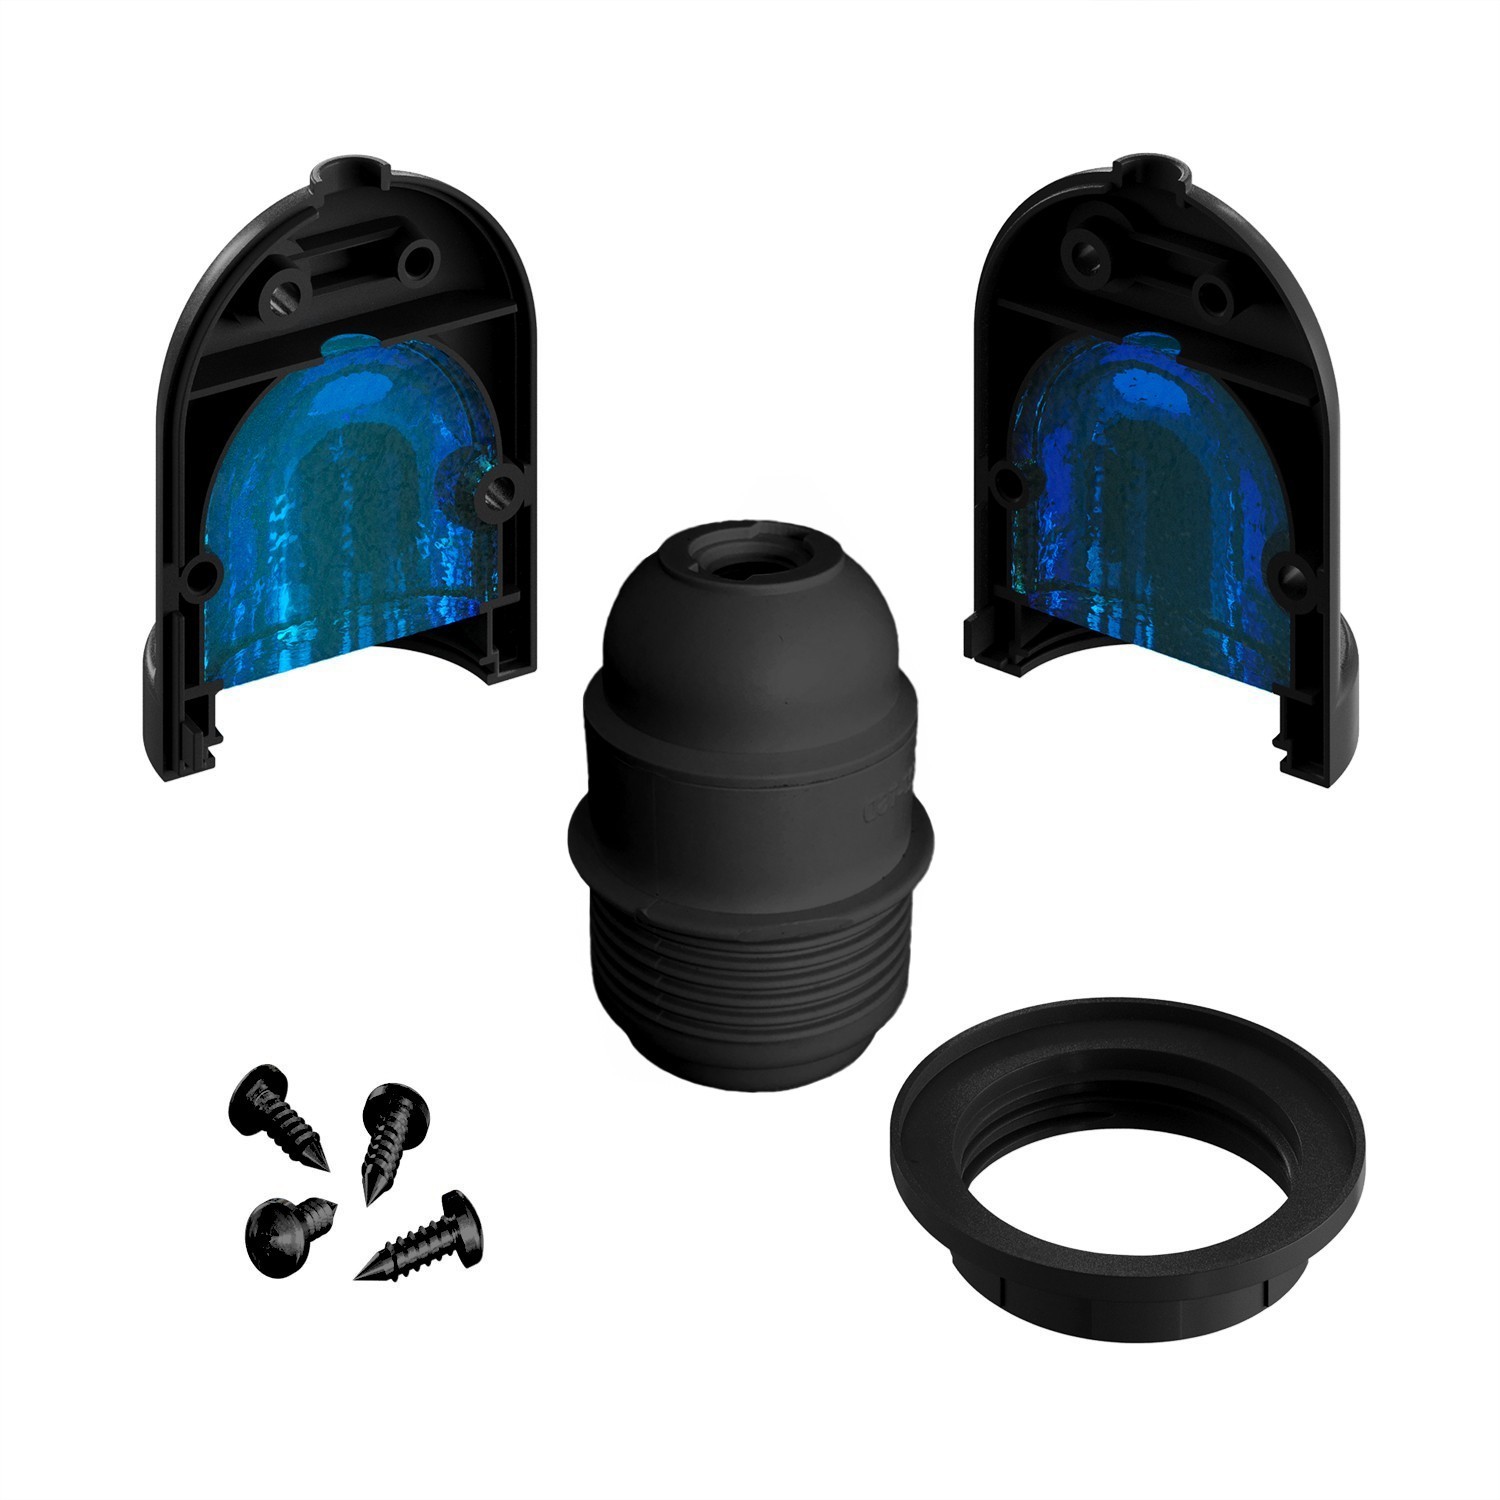 EIVA ELEGANT, E27 outdoor silicone lamp holder kit - the first IP65 wirable lamp holder worldwide